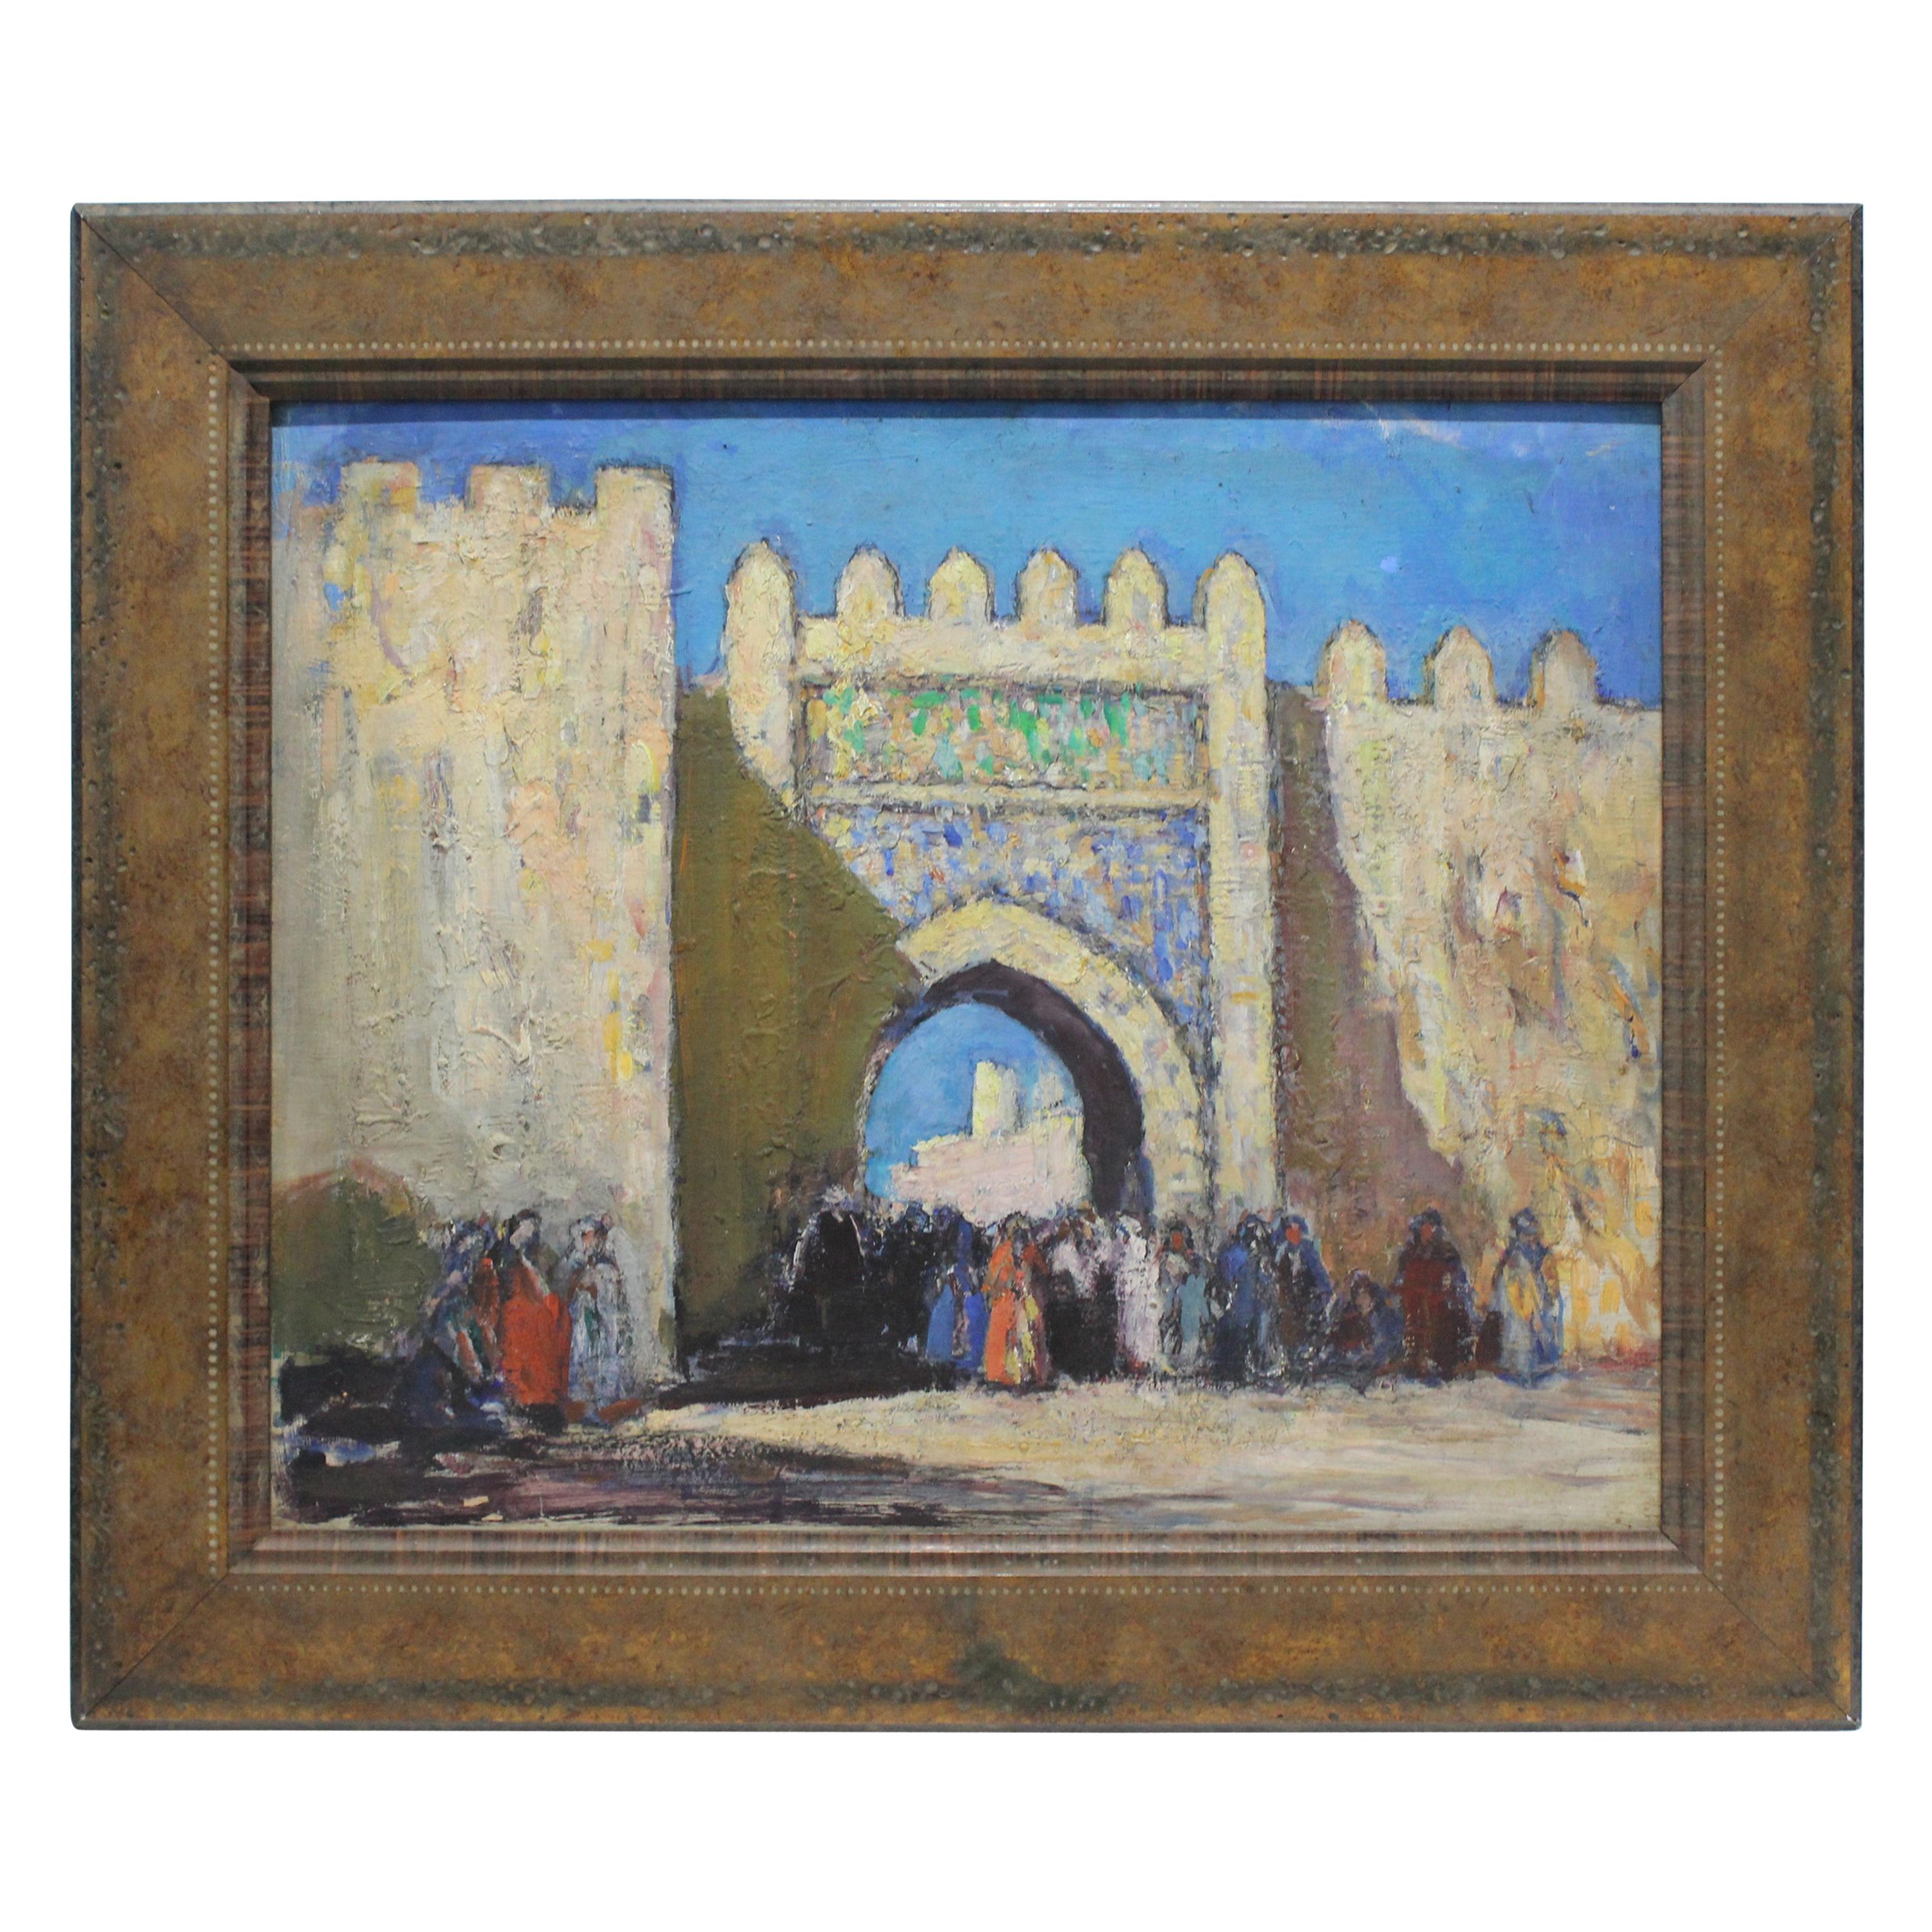 "The Gate" Oil on Board Painting by Donald Frederick Witherstine